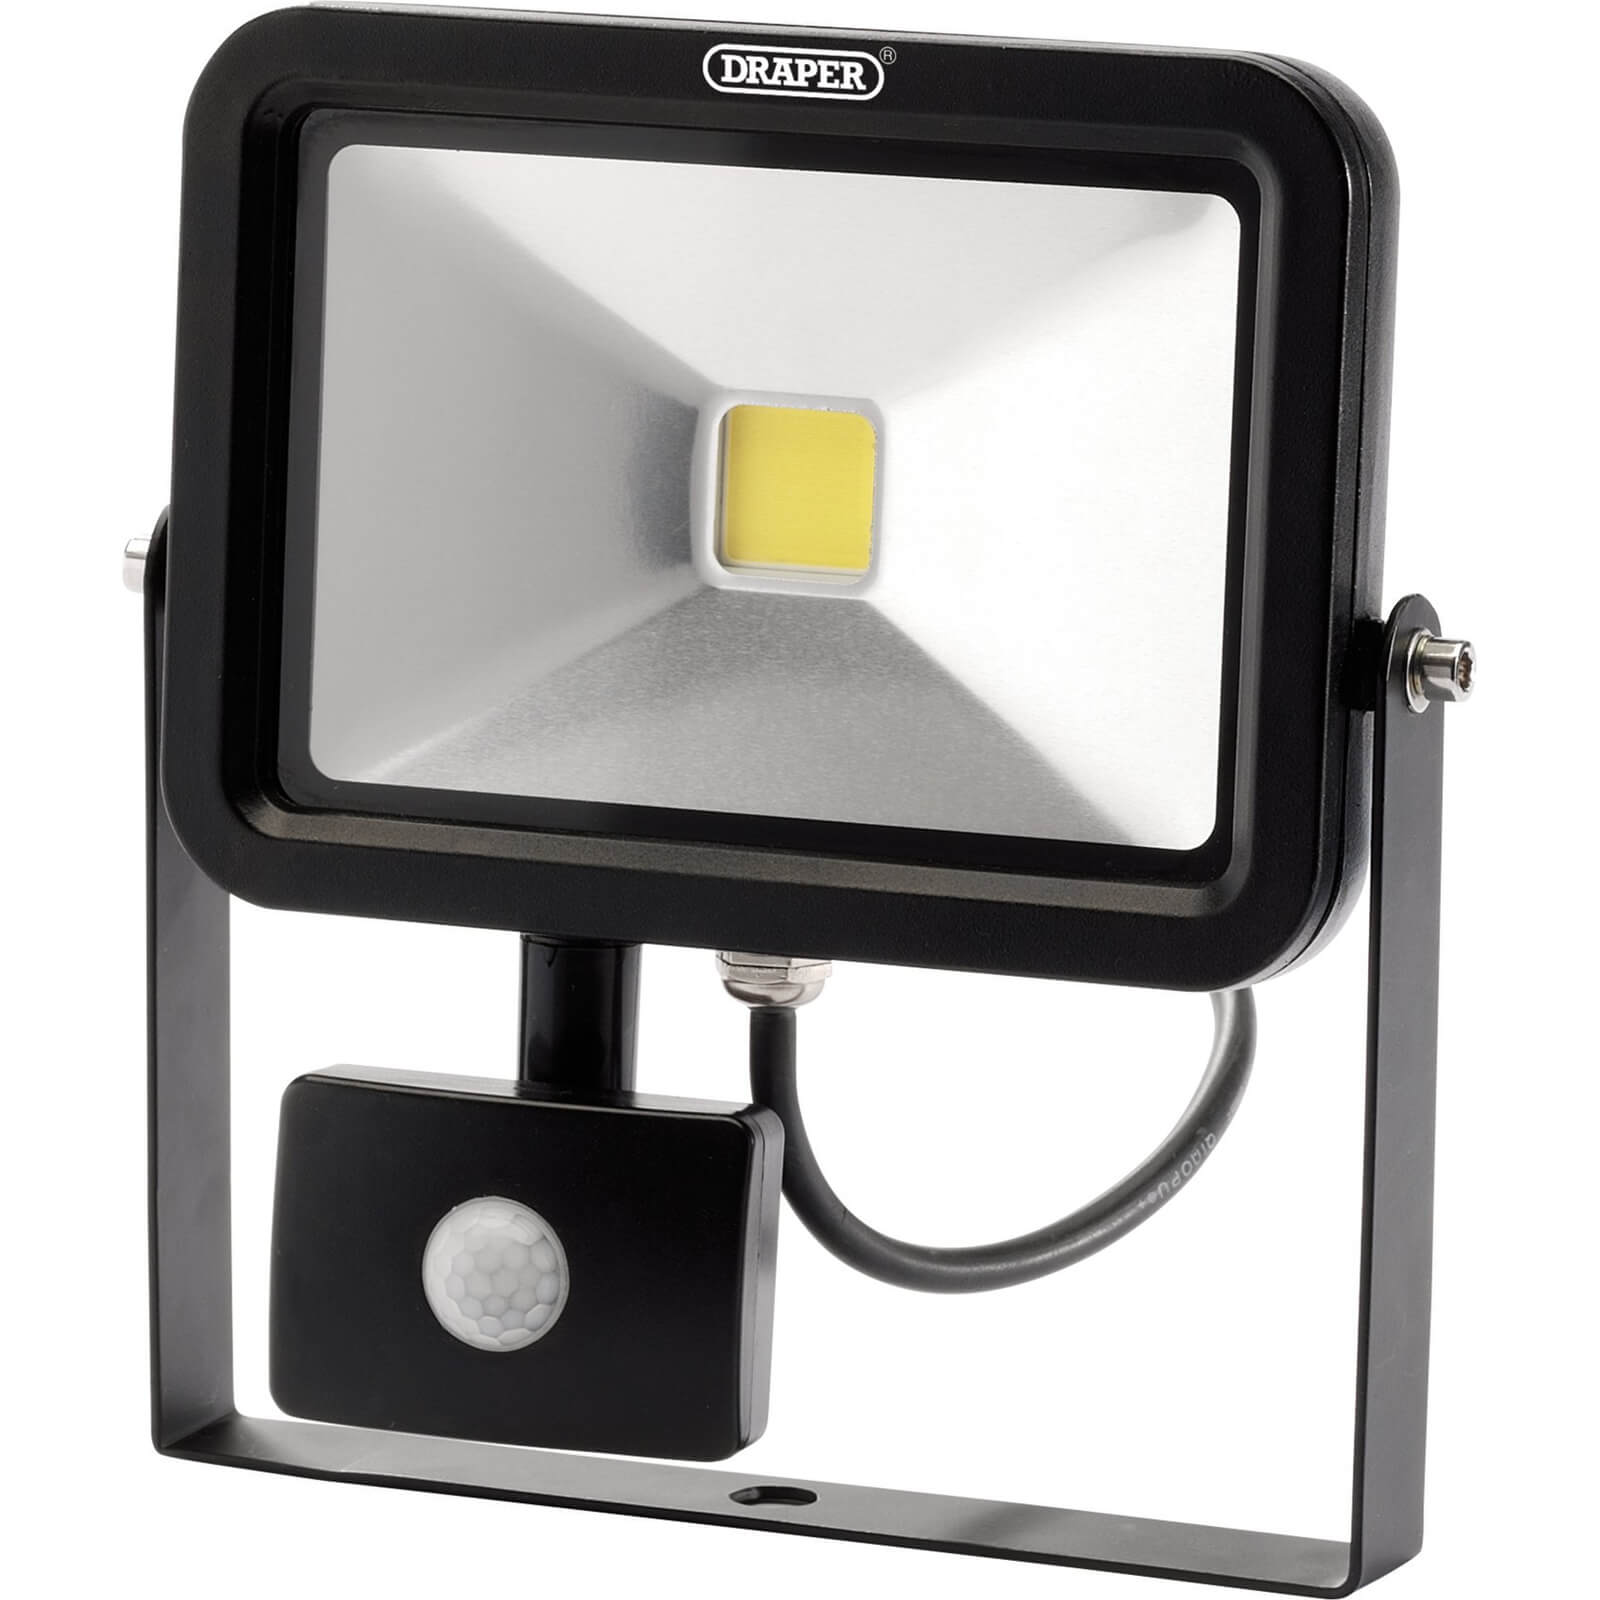 Photo of Draper Cob Led Slimeline Wall Mounted Floodlight With Pir 20 Watts